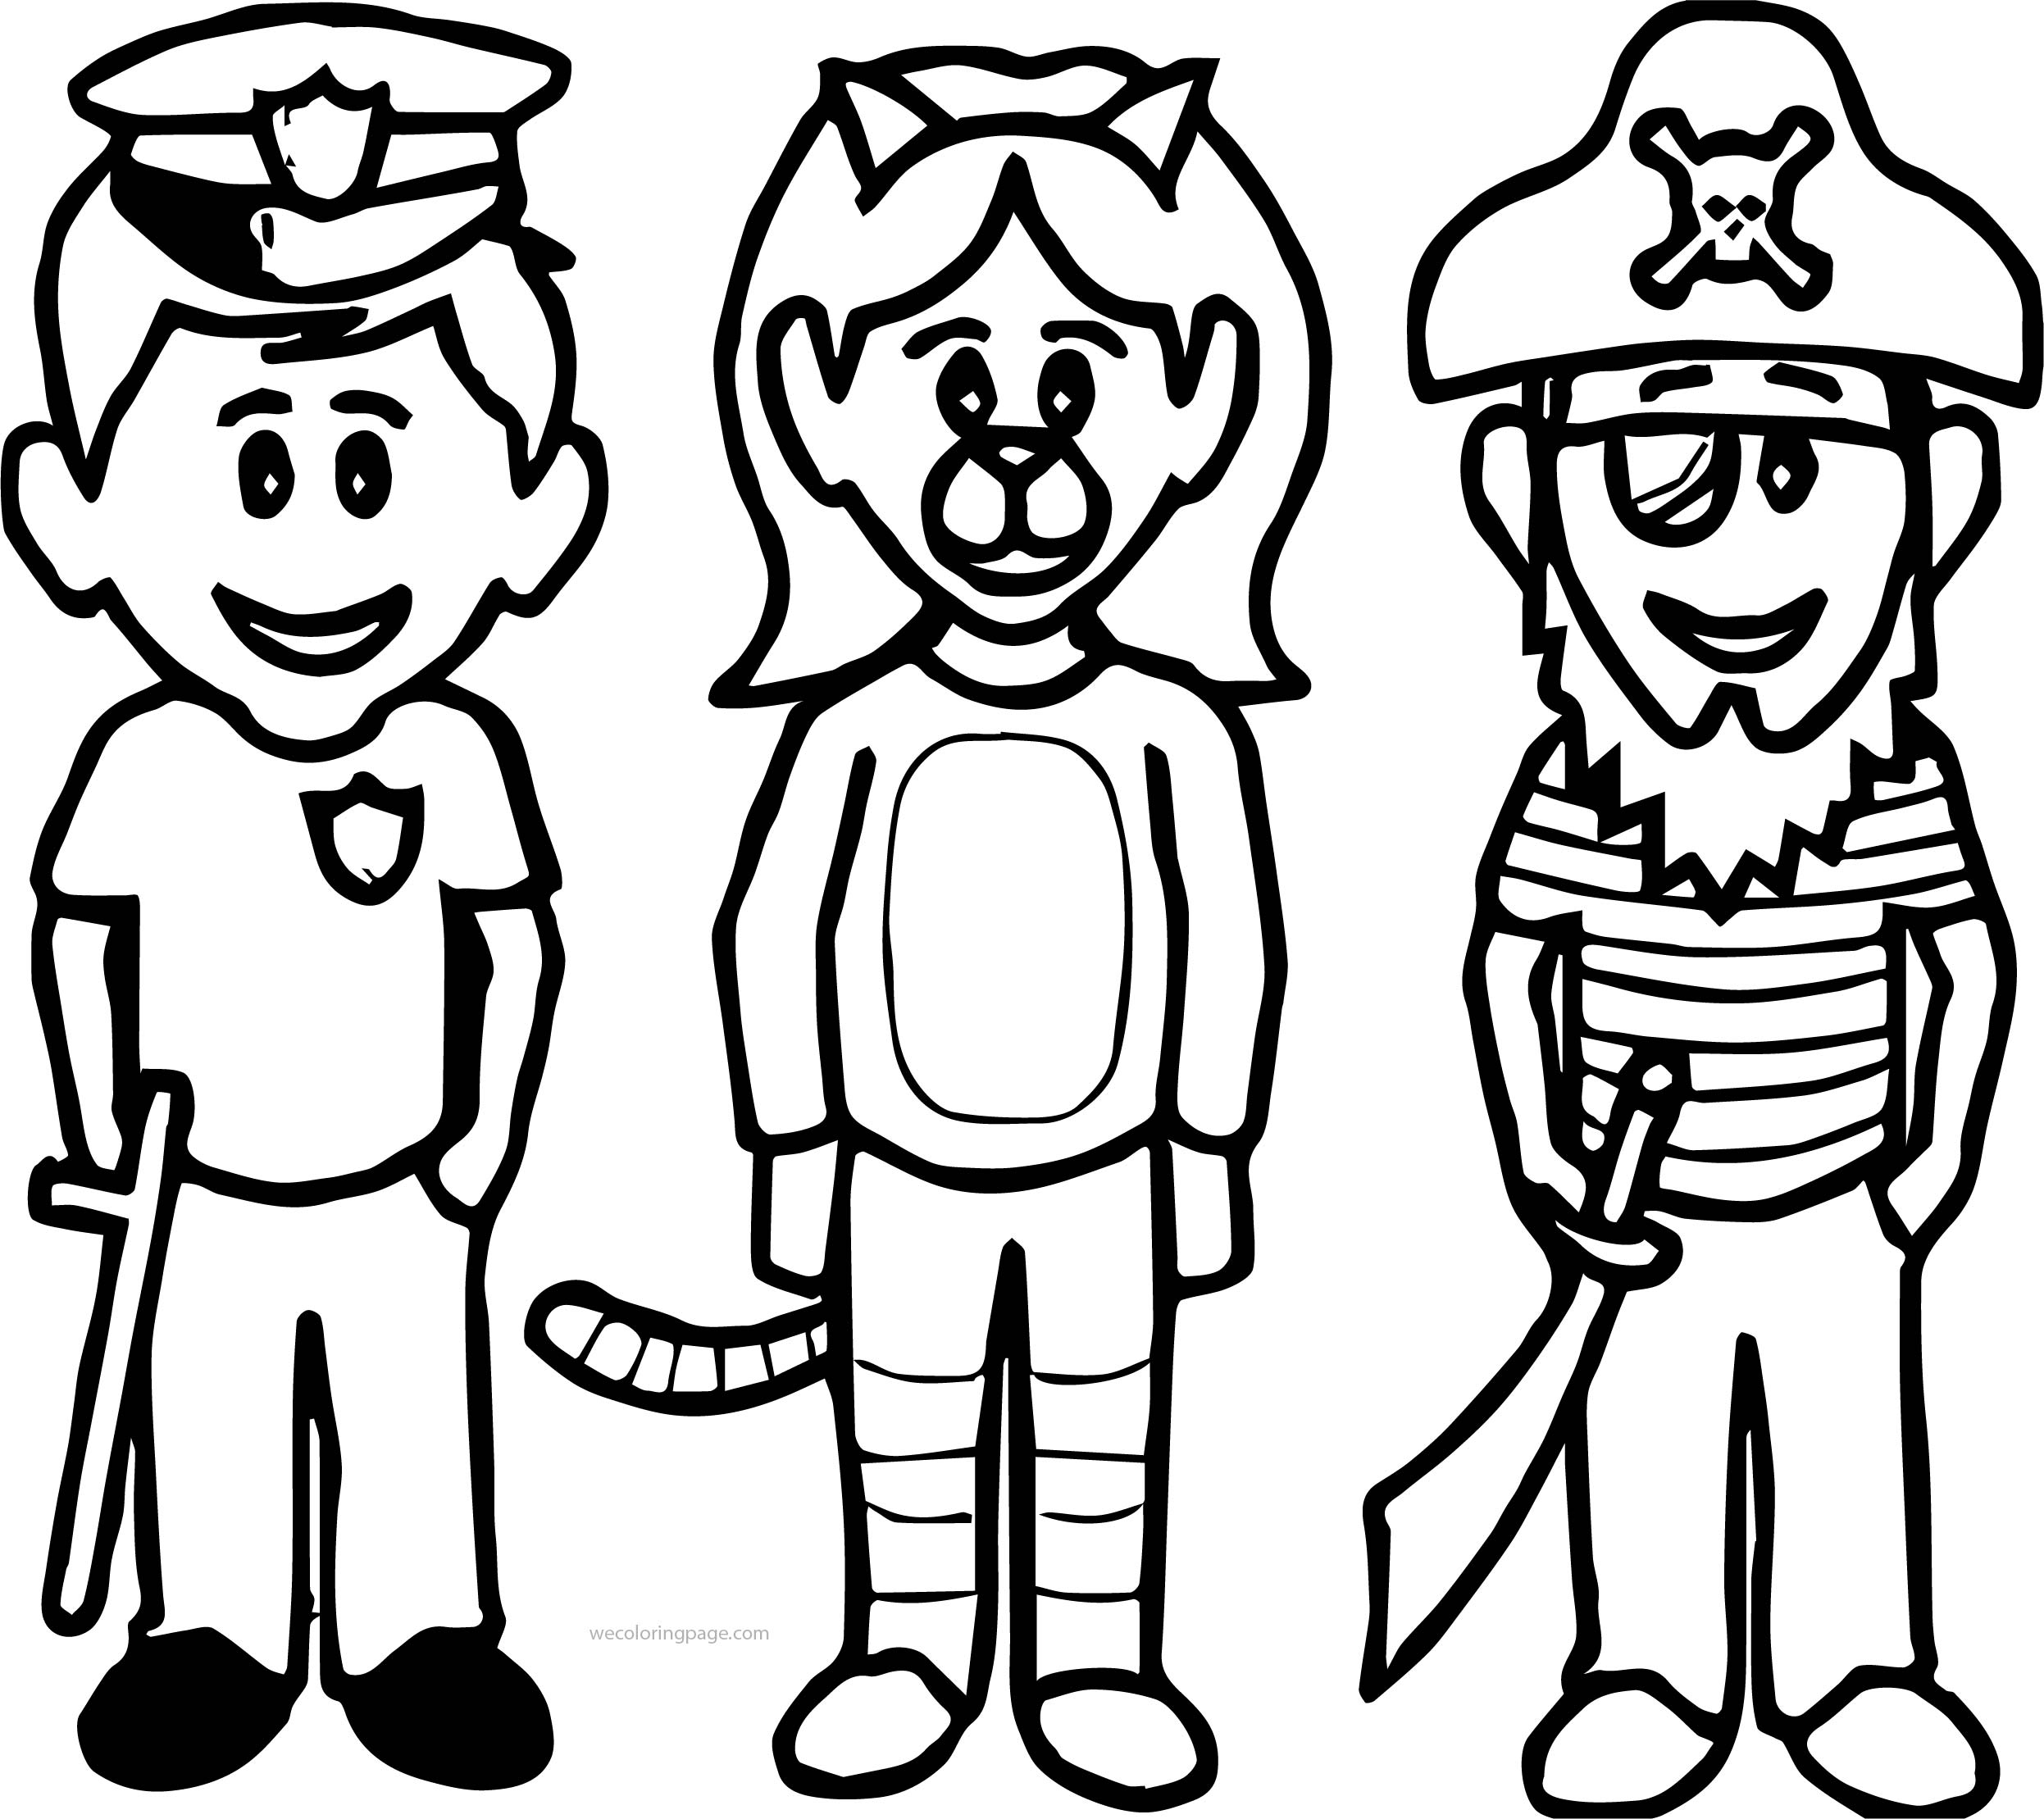 Halloween Kids Police King Pirate Coloring Page - Wecoloringpage.com